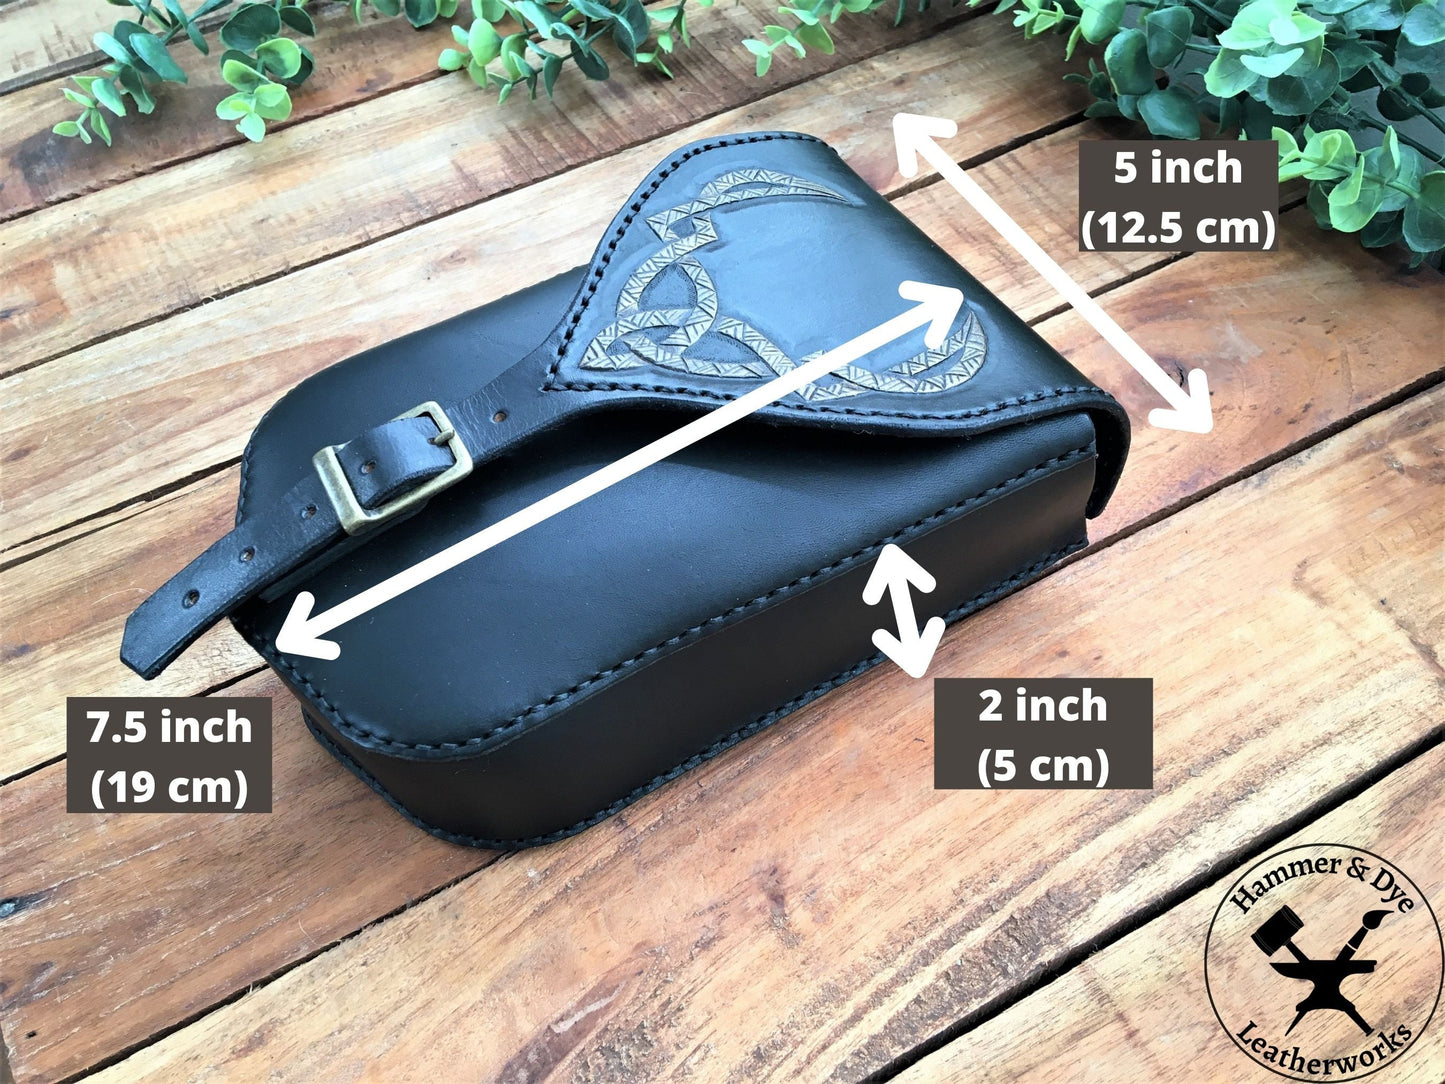 Large Handmade Black Leather Belt Pouch with Buckle Closing and Viking Style Knotwork Carving With Size Guide